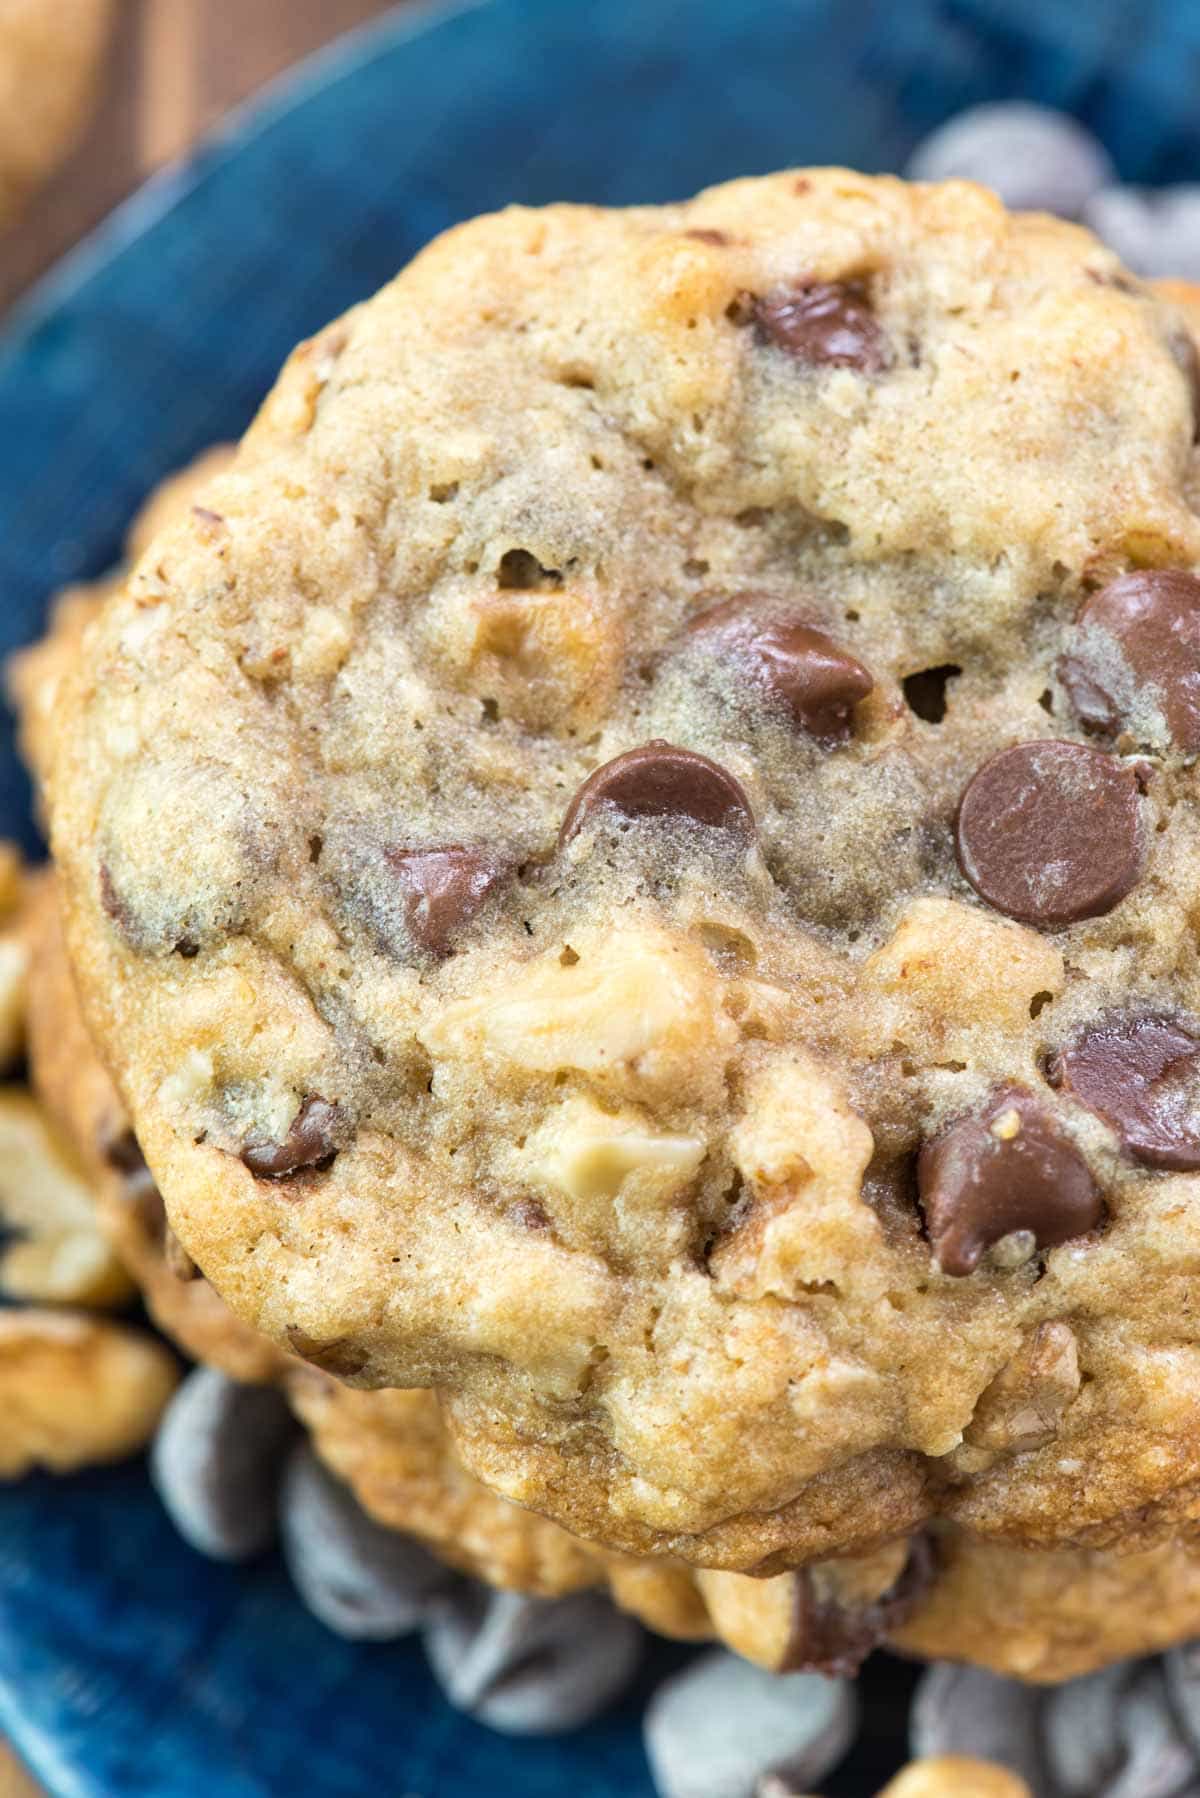 This chocolate chip cookie recipe is even BETTER than the Doubletree Chocolate Chip Cookies!! It's gooey and full of chocolate, oats, and walnuts. Plus, they're HUGE!